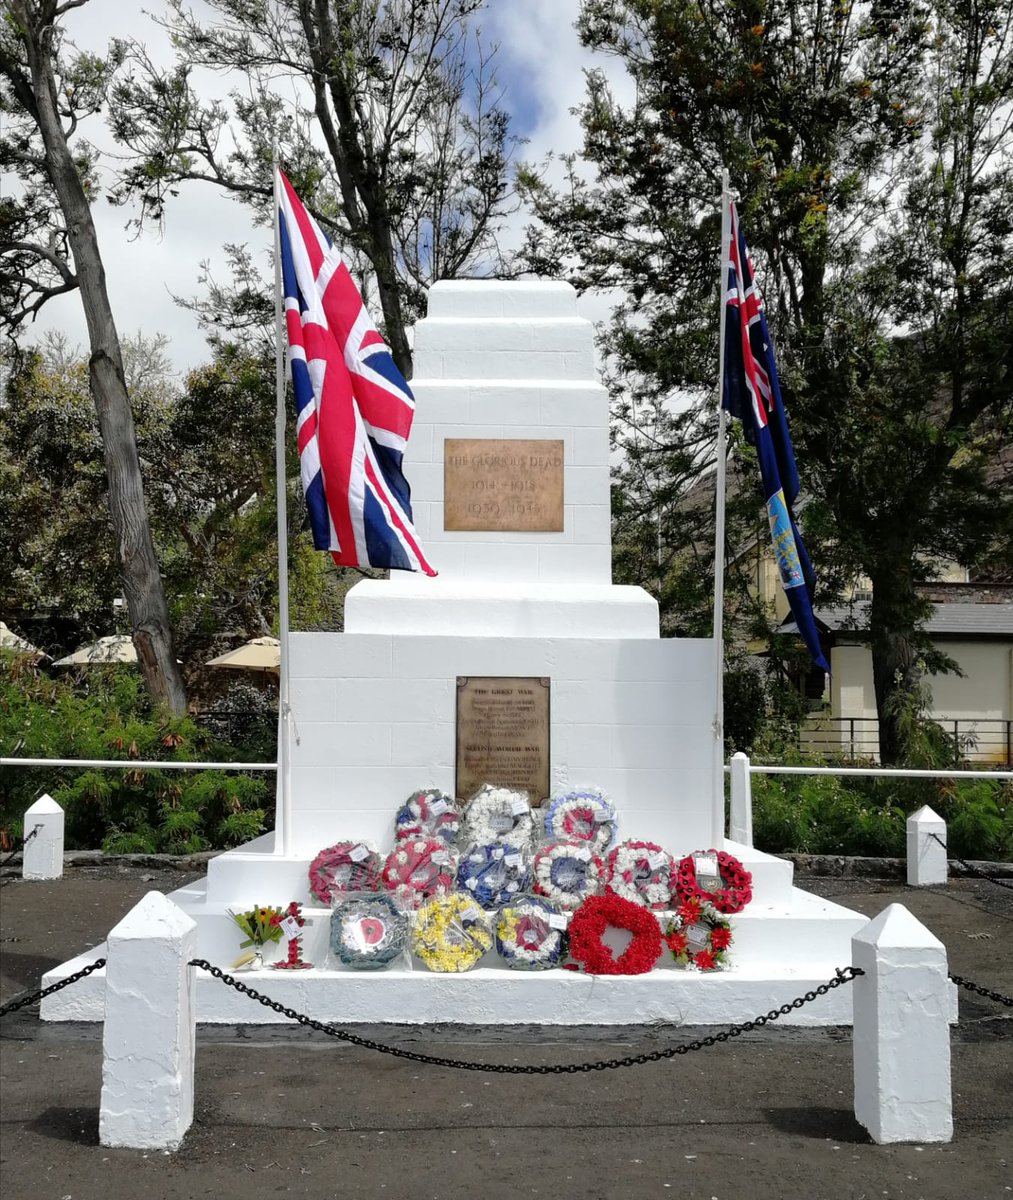 Respectful Remembrance Sunday service & parade @ #StHelena's Cenotaph, Jamestown & at sea over RFA Darkdale-sunk James Bay, 1942. Wreaths laid by Governor, Chief Minister, French consul, veterans, civilian services & schools. @PoppyLegion @FCDOGovUK @DefenceHQ @StHelenaGovt🇸🇭🇦🇨🇹🇦